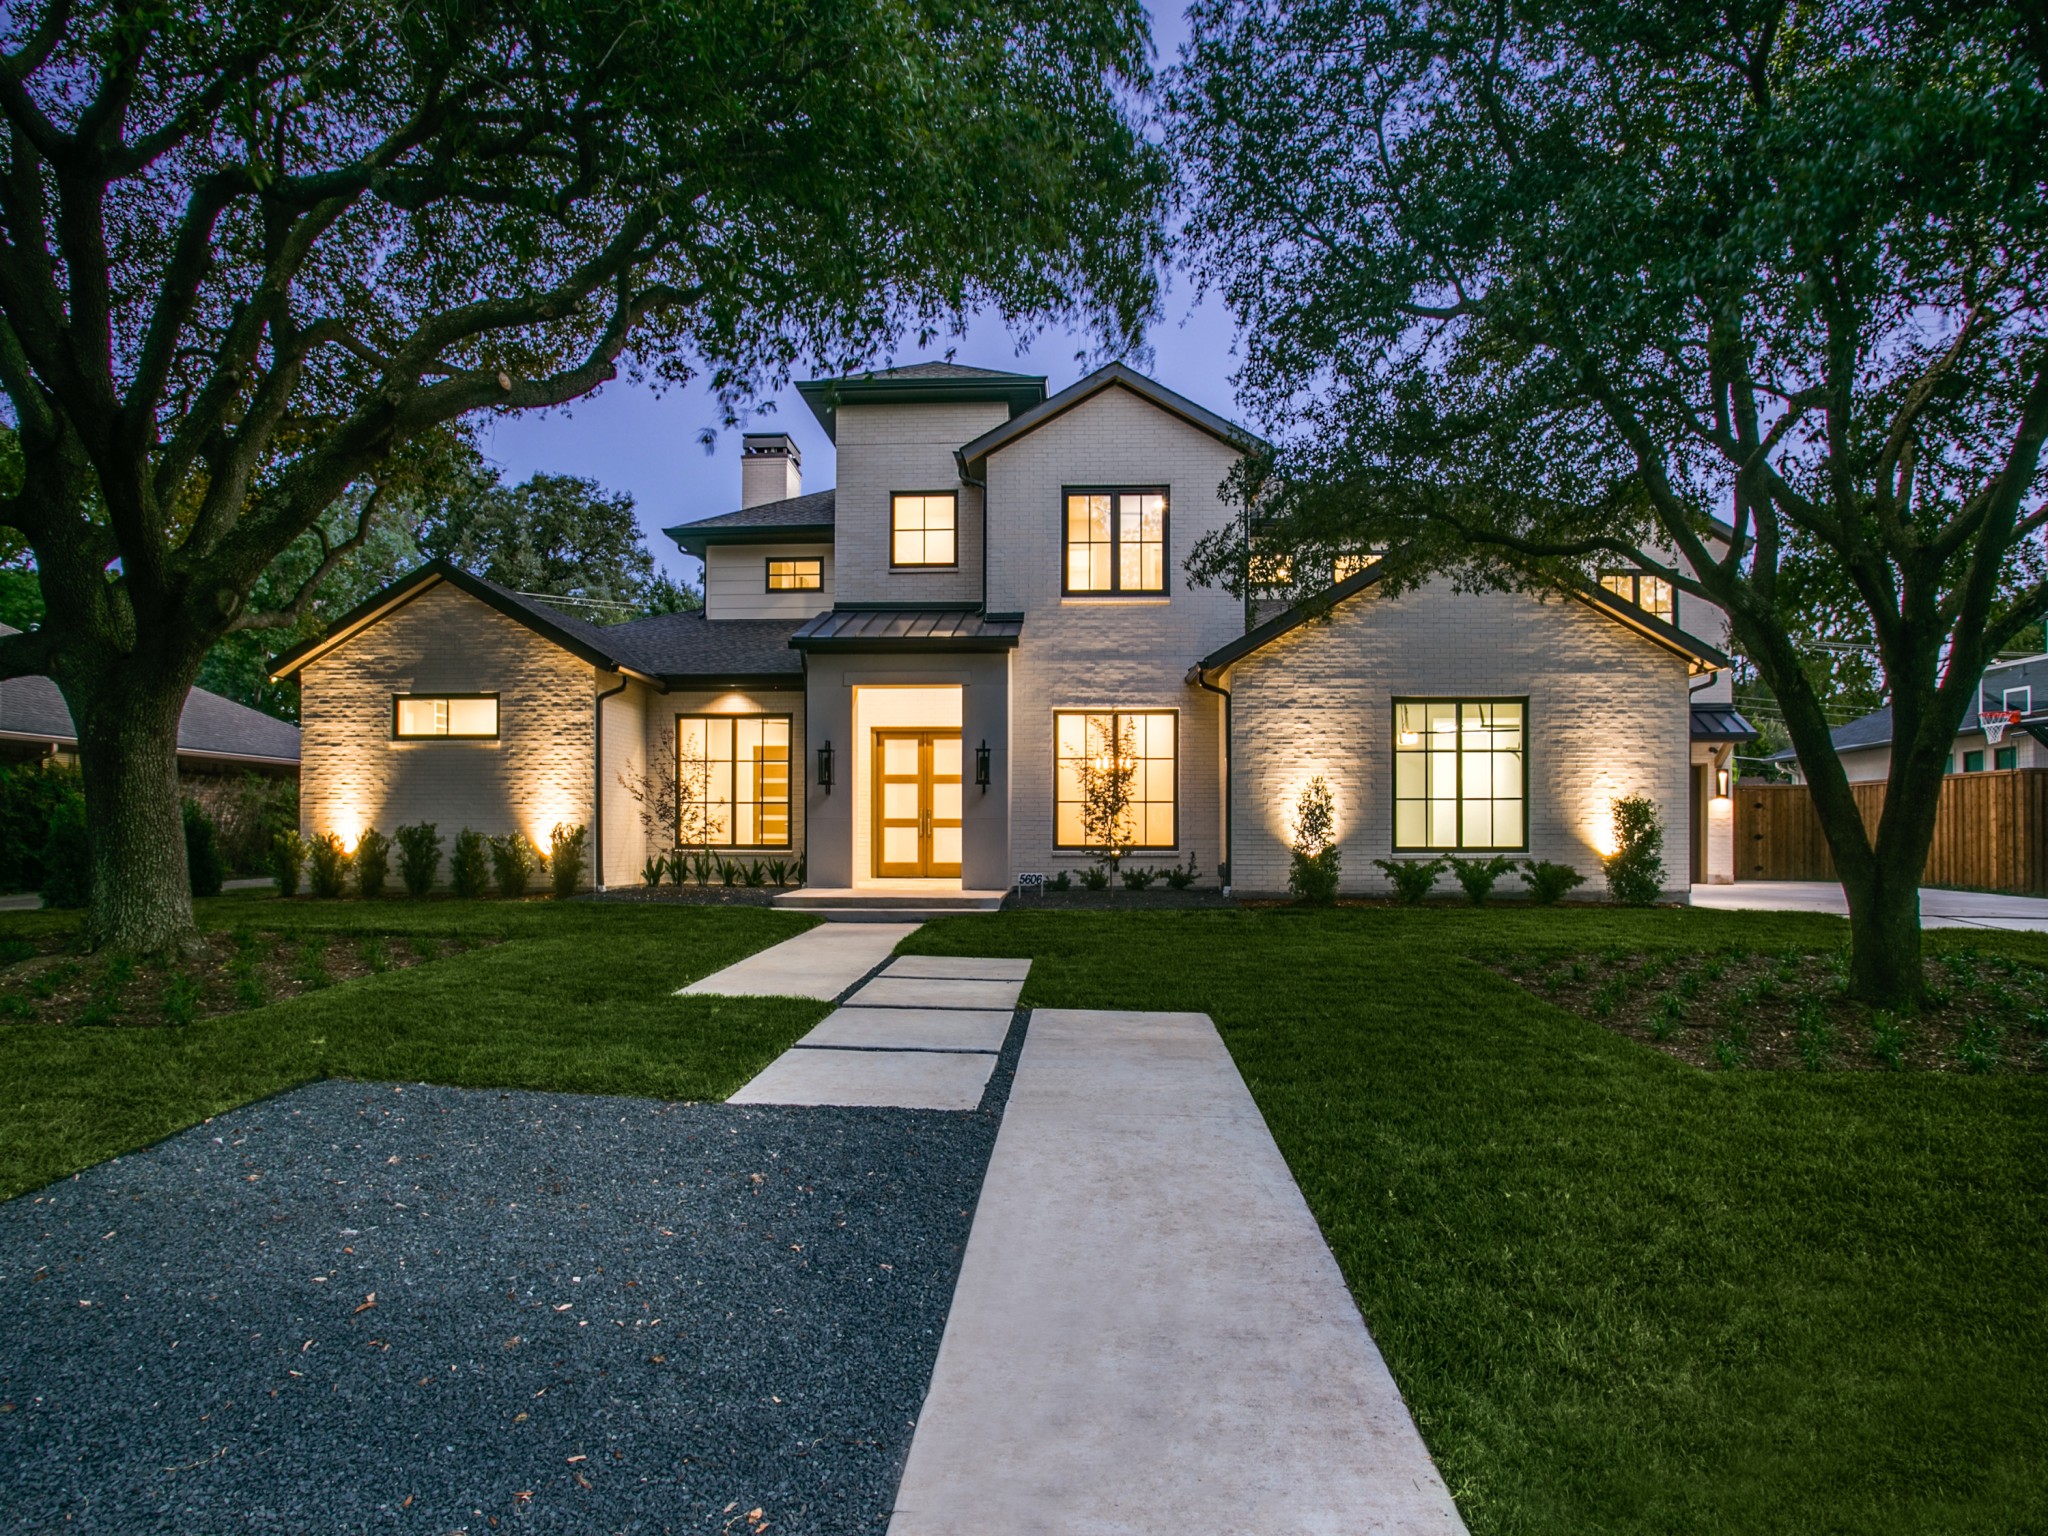 SOLD IN PRESTON HOLLOW. ANOTHER CUSTOM HOME BY DESCO FINE HOMES